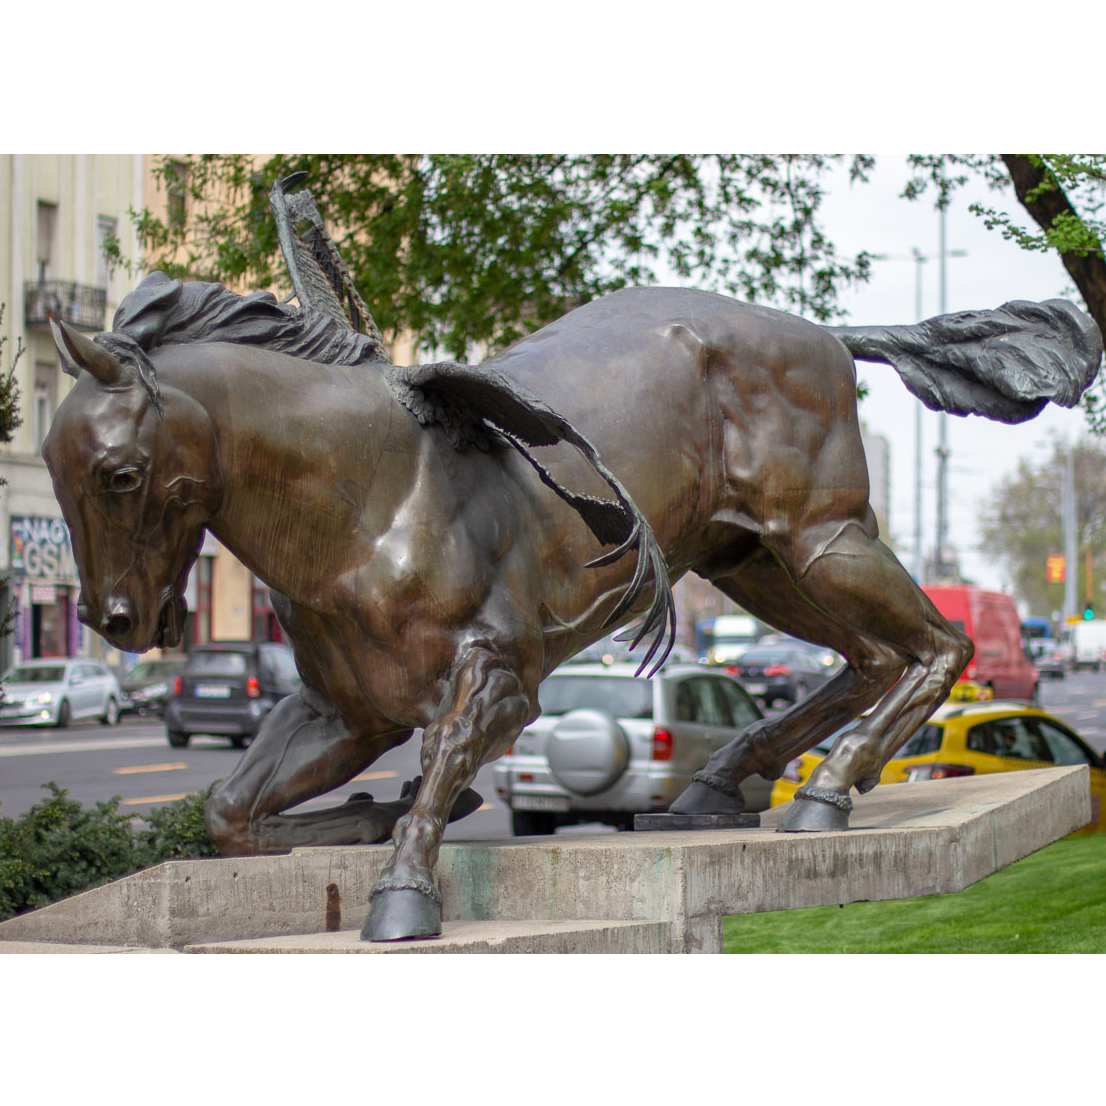 Budapest horse statues